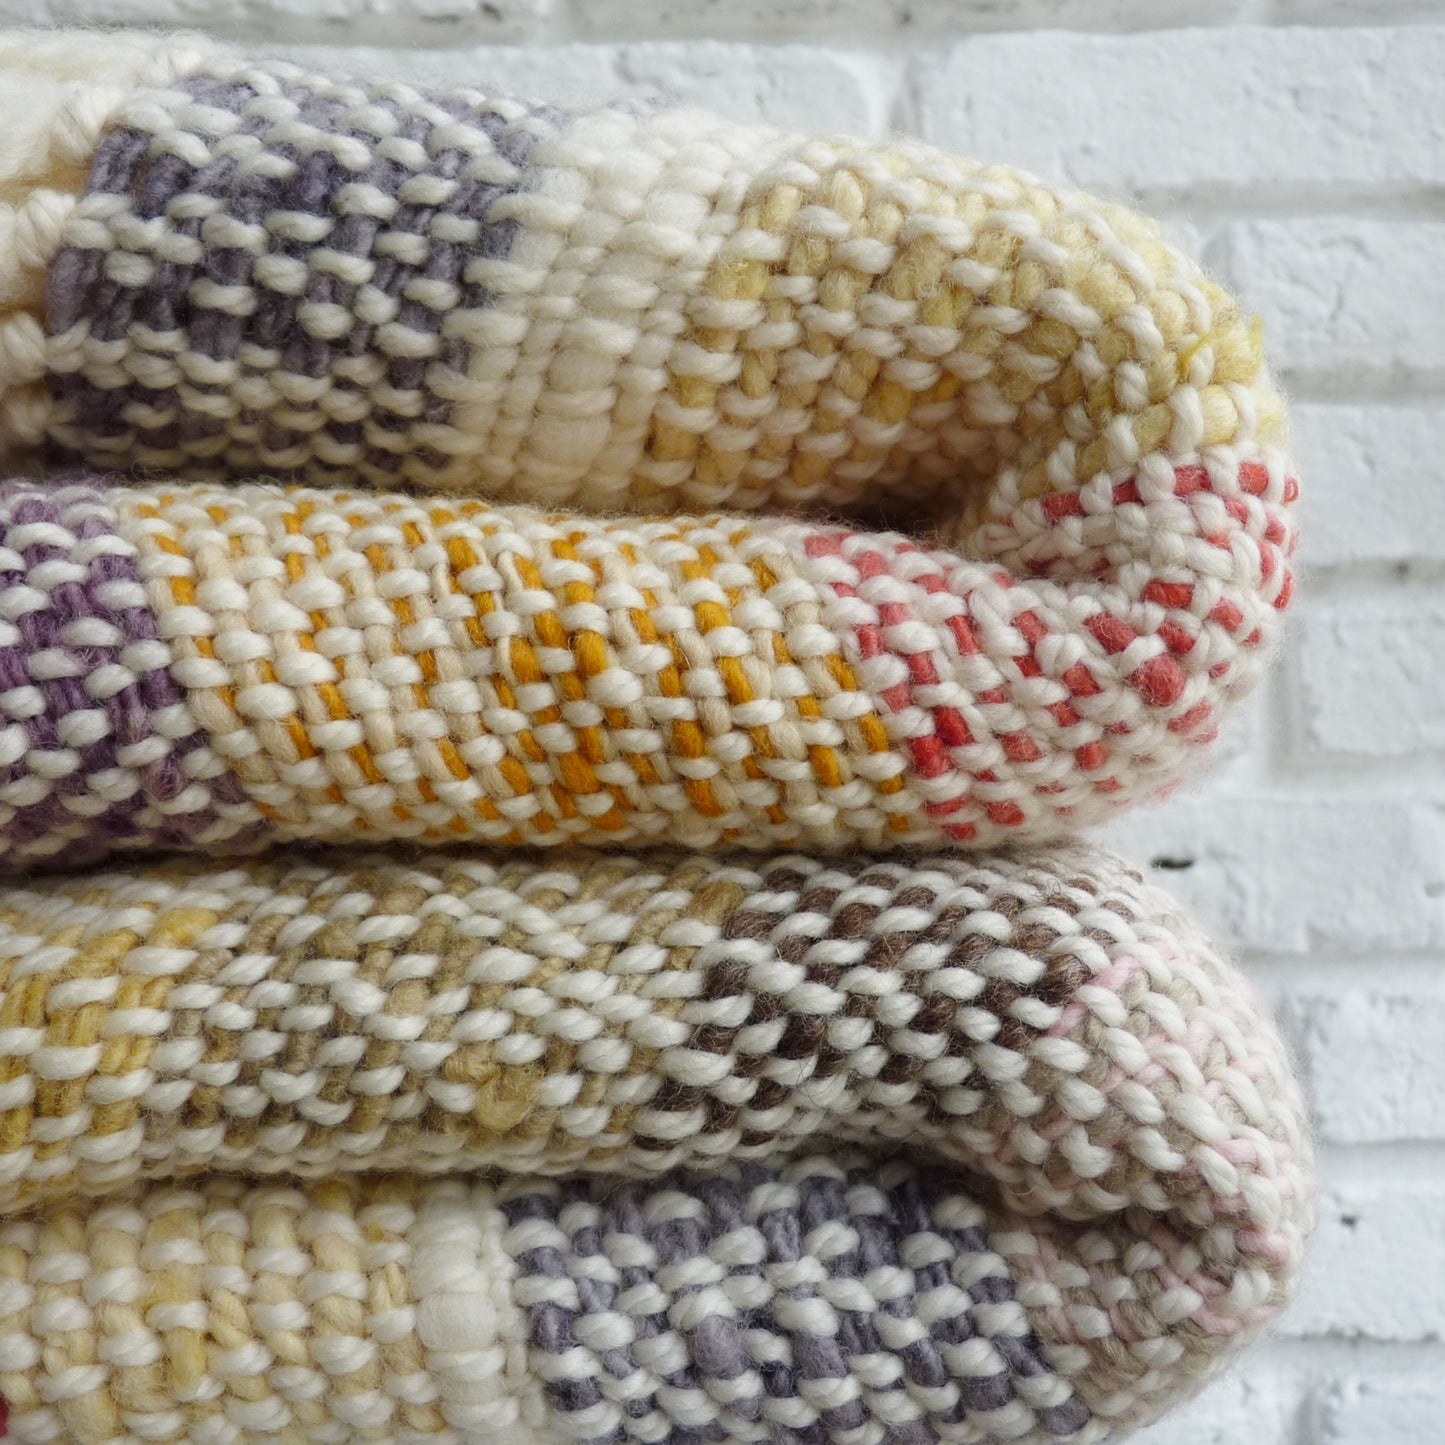 Chunky Merino Colorful Woven Throw - A One-of-a-Kind Sustainable Luxury Blanket that Will Last for Years to Come.